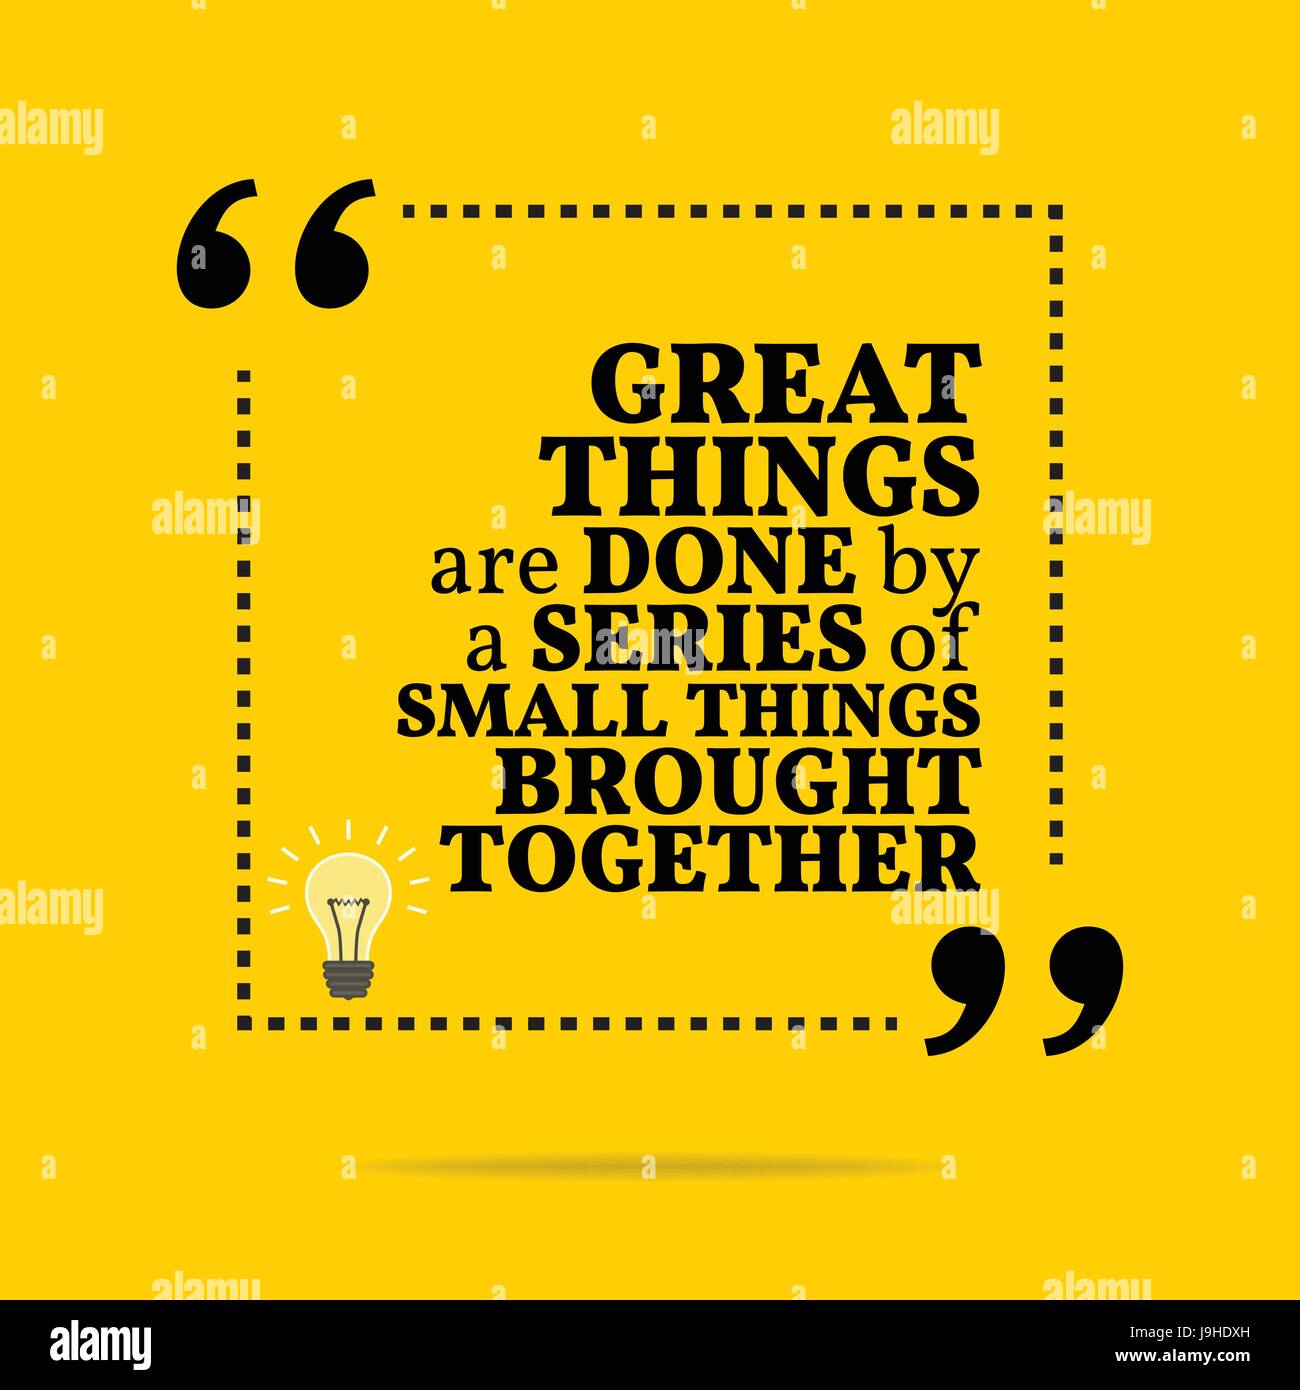 Inspirational motivational quote. Great things are done by a series of small things brought together. Simple trendy design. Stock Vector